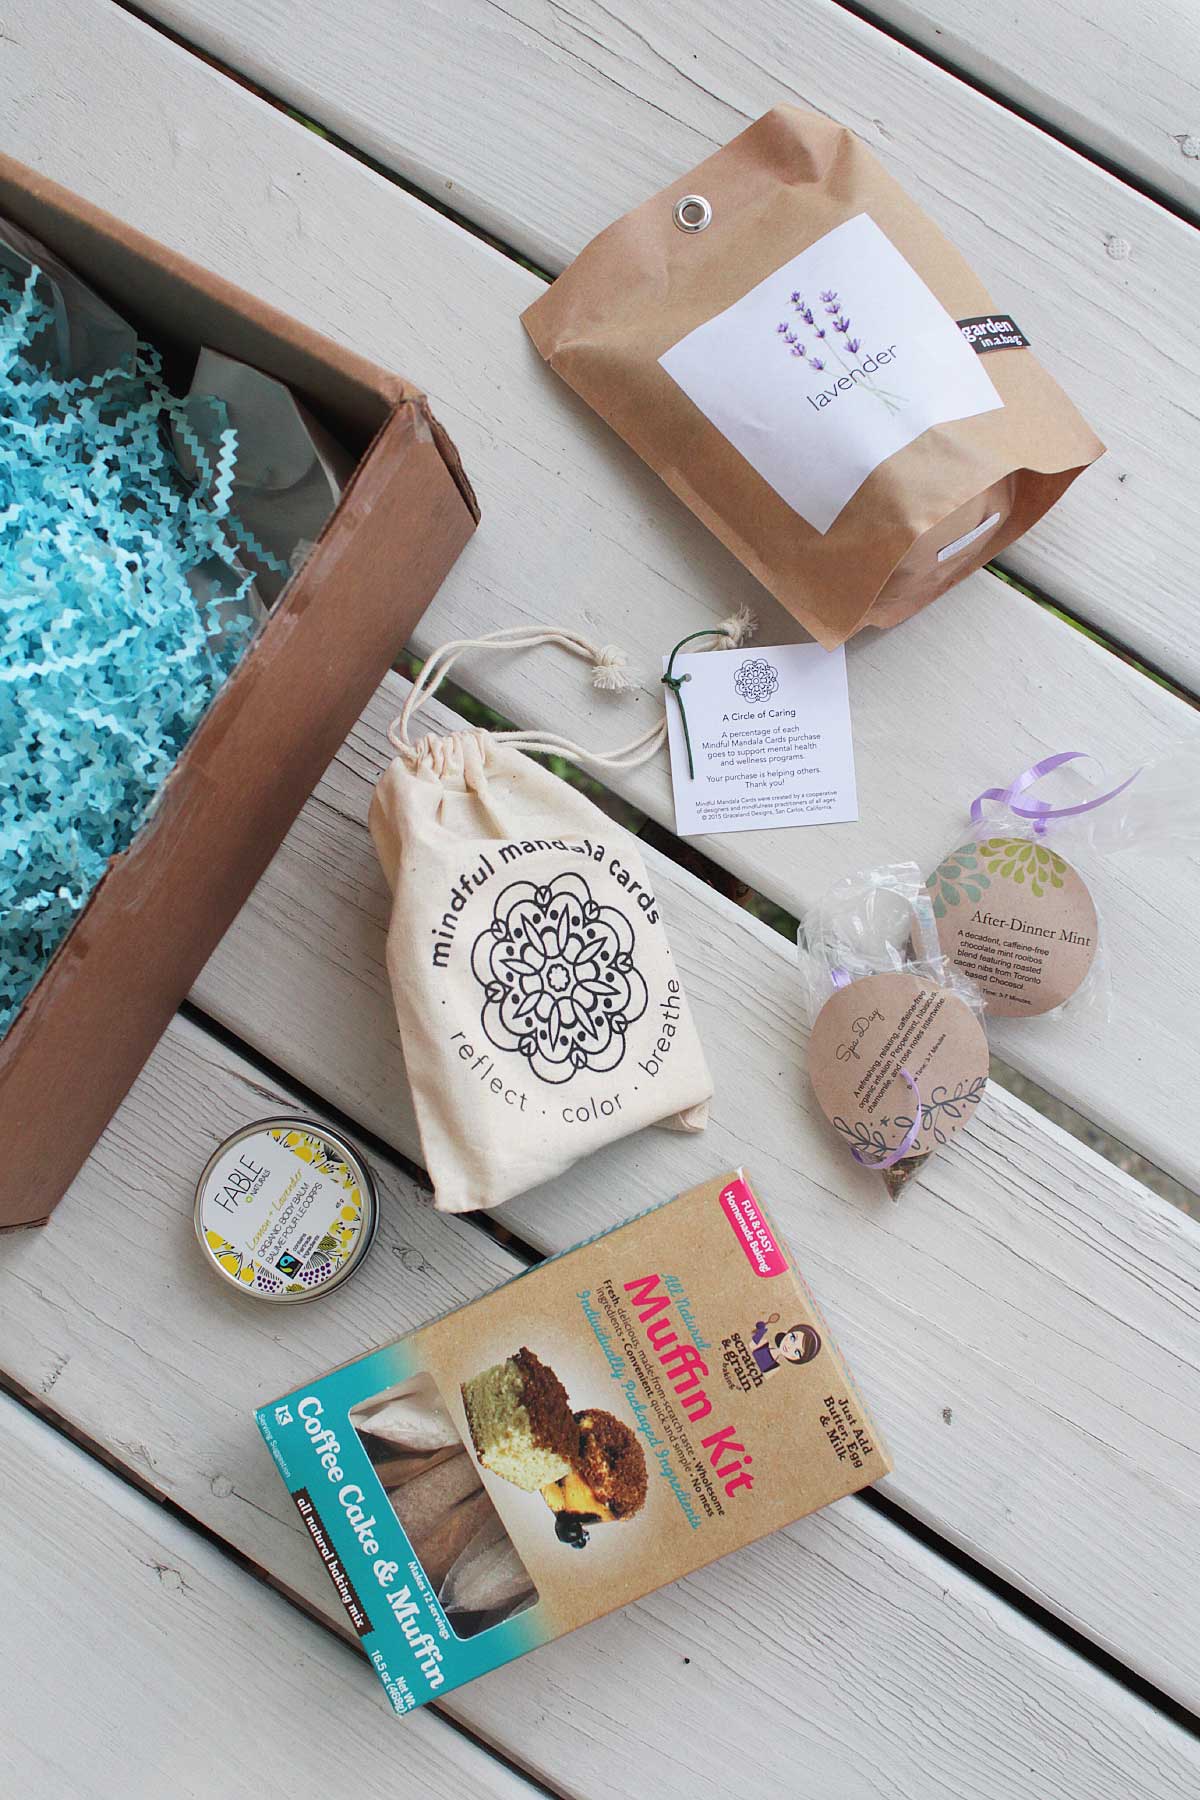 Channeling her love of psychology and passion for helping others, Janelle Martel created a subscription box for those who are suffering from chronic illness, experiencing mental health issues, or just need a little extra TLC. 